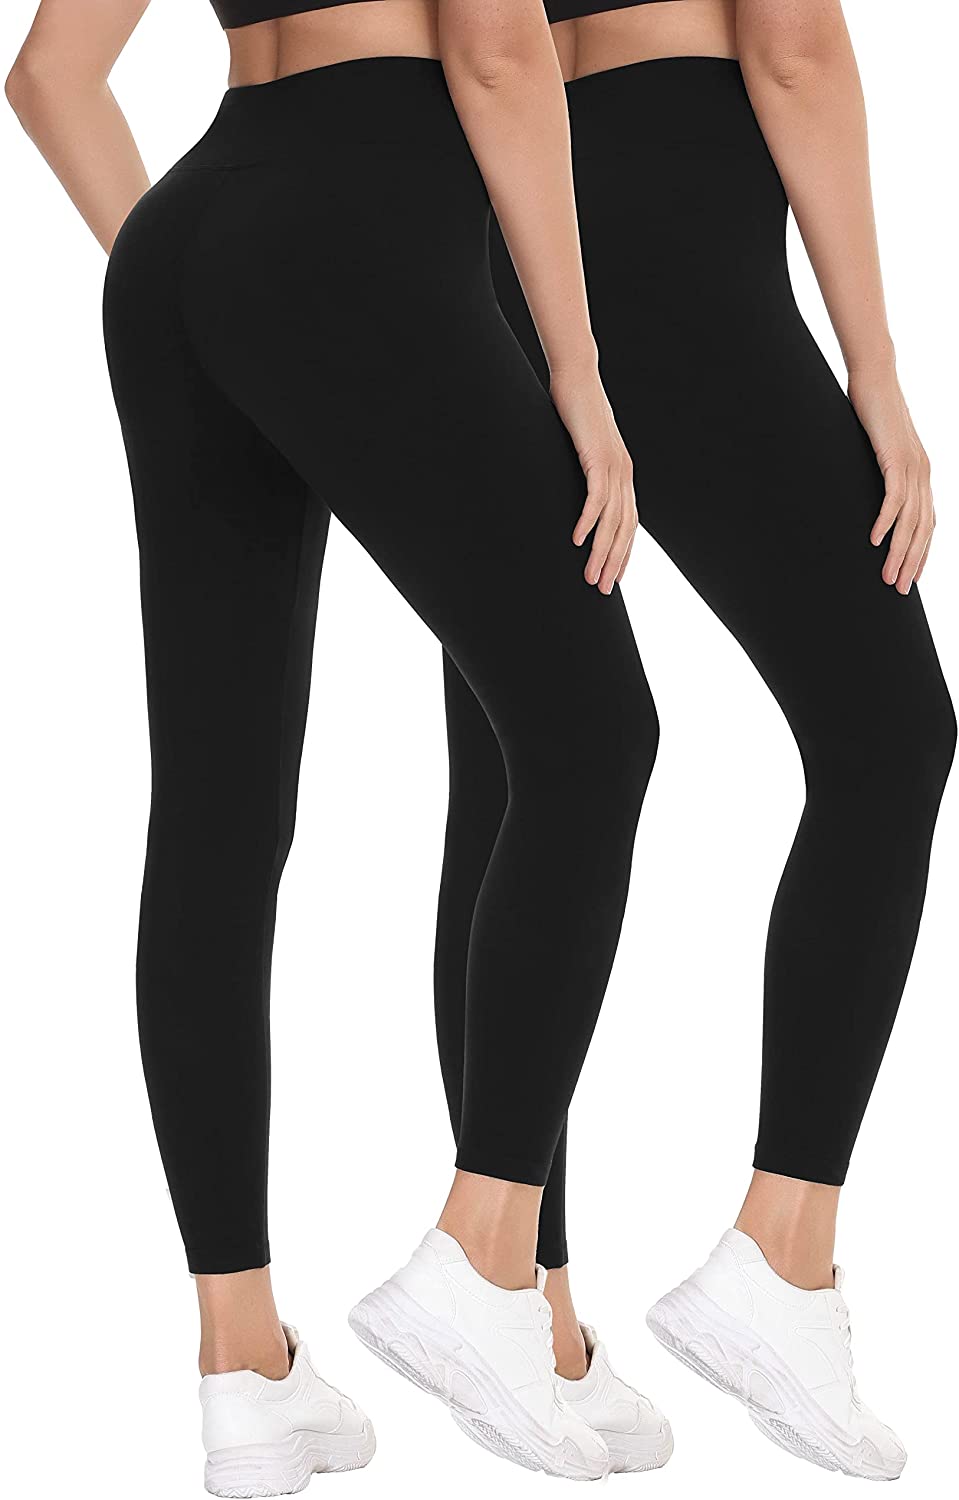 Ewedoos 2 Pack Leggings with Pockets for Women Tummy Control High